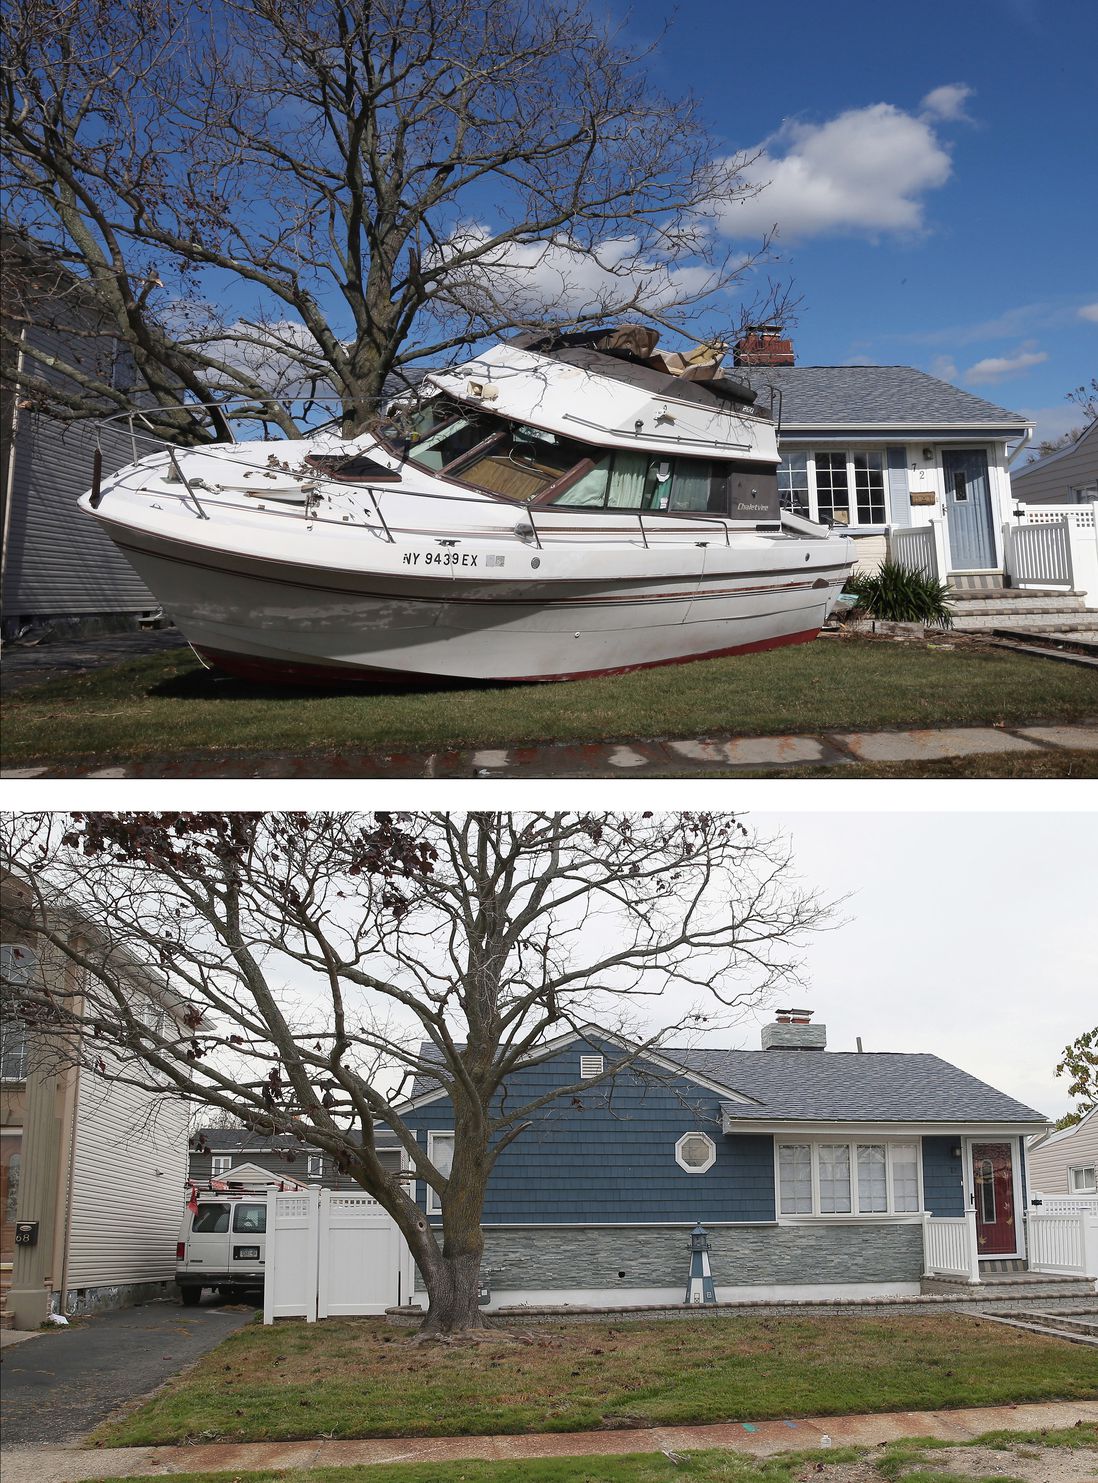 [Top] In the aftermath of Hurricane Sandy, boats continue to litter the landscape on Grant Street on November 2, 2012 in Freeport, New York. [Bottom] A home that had sustained damage during Superstorm Sandy sits on Grant Street on October 22, 2013 in Freeport, New York.